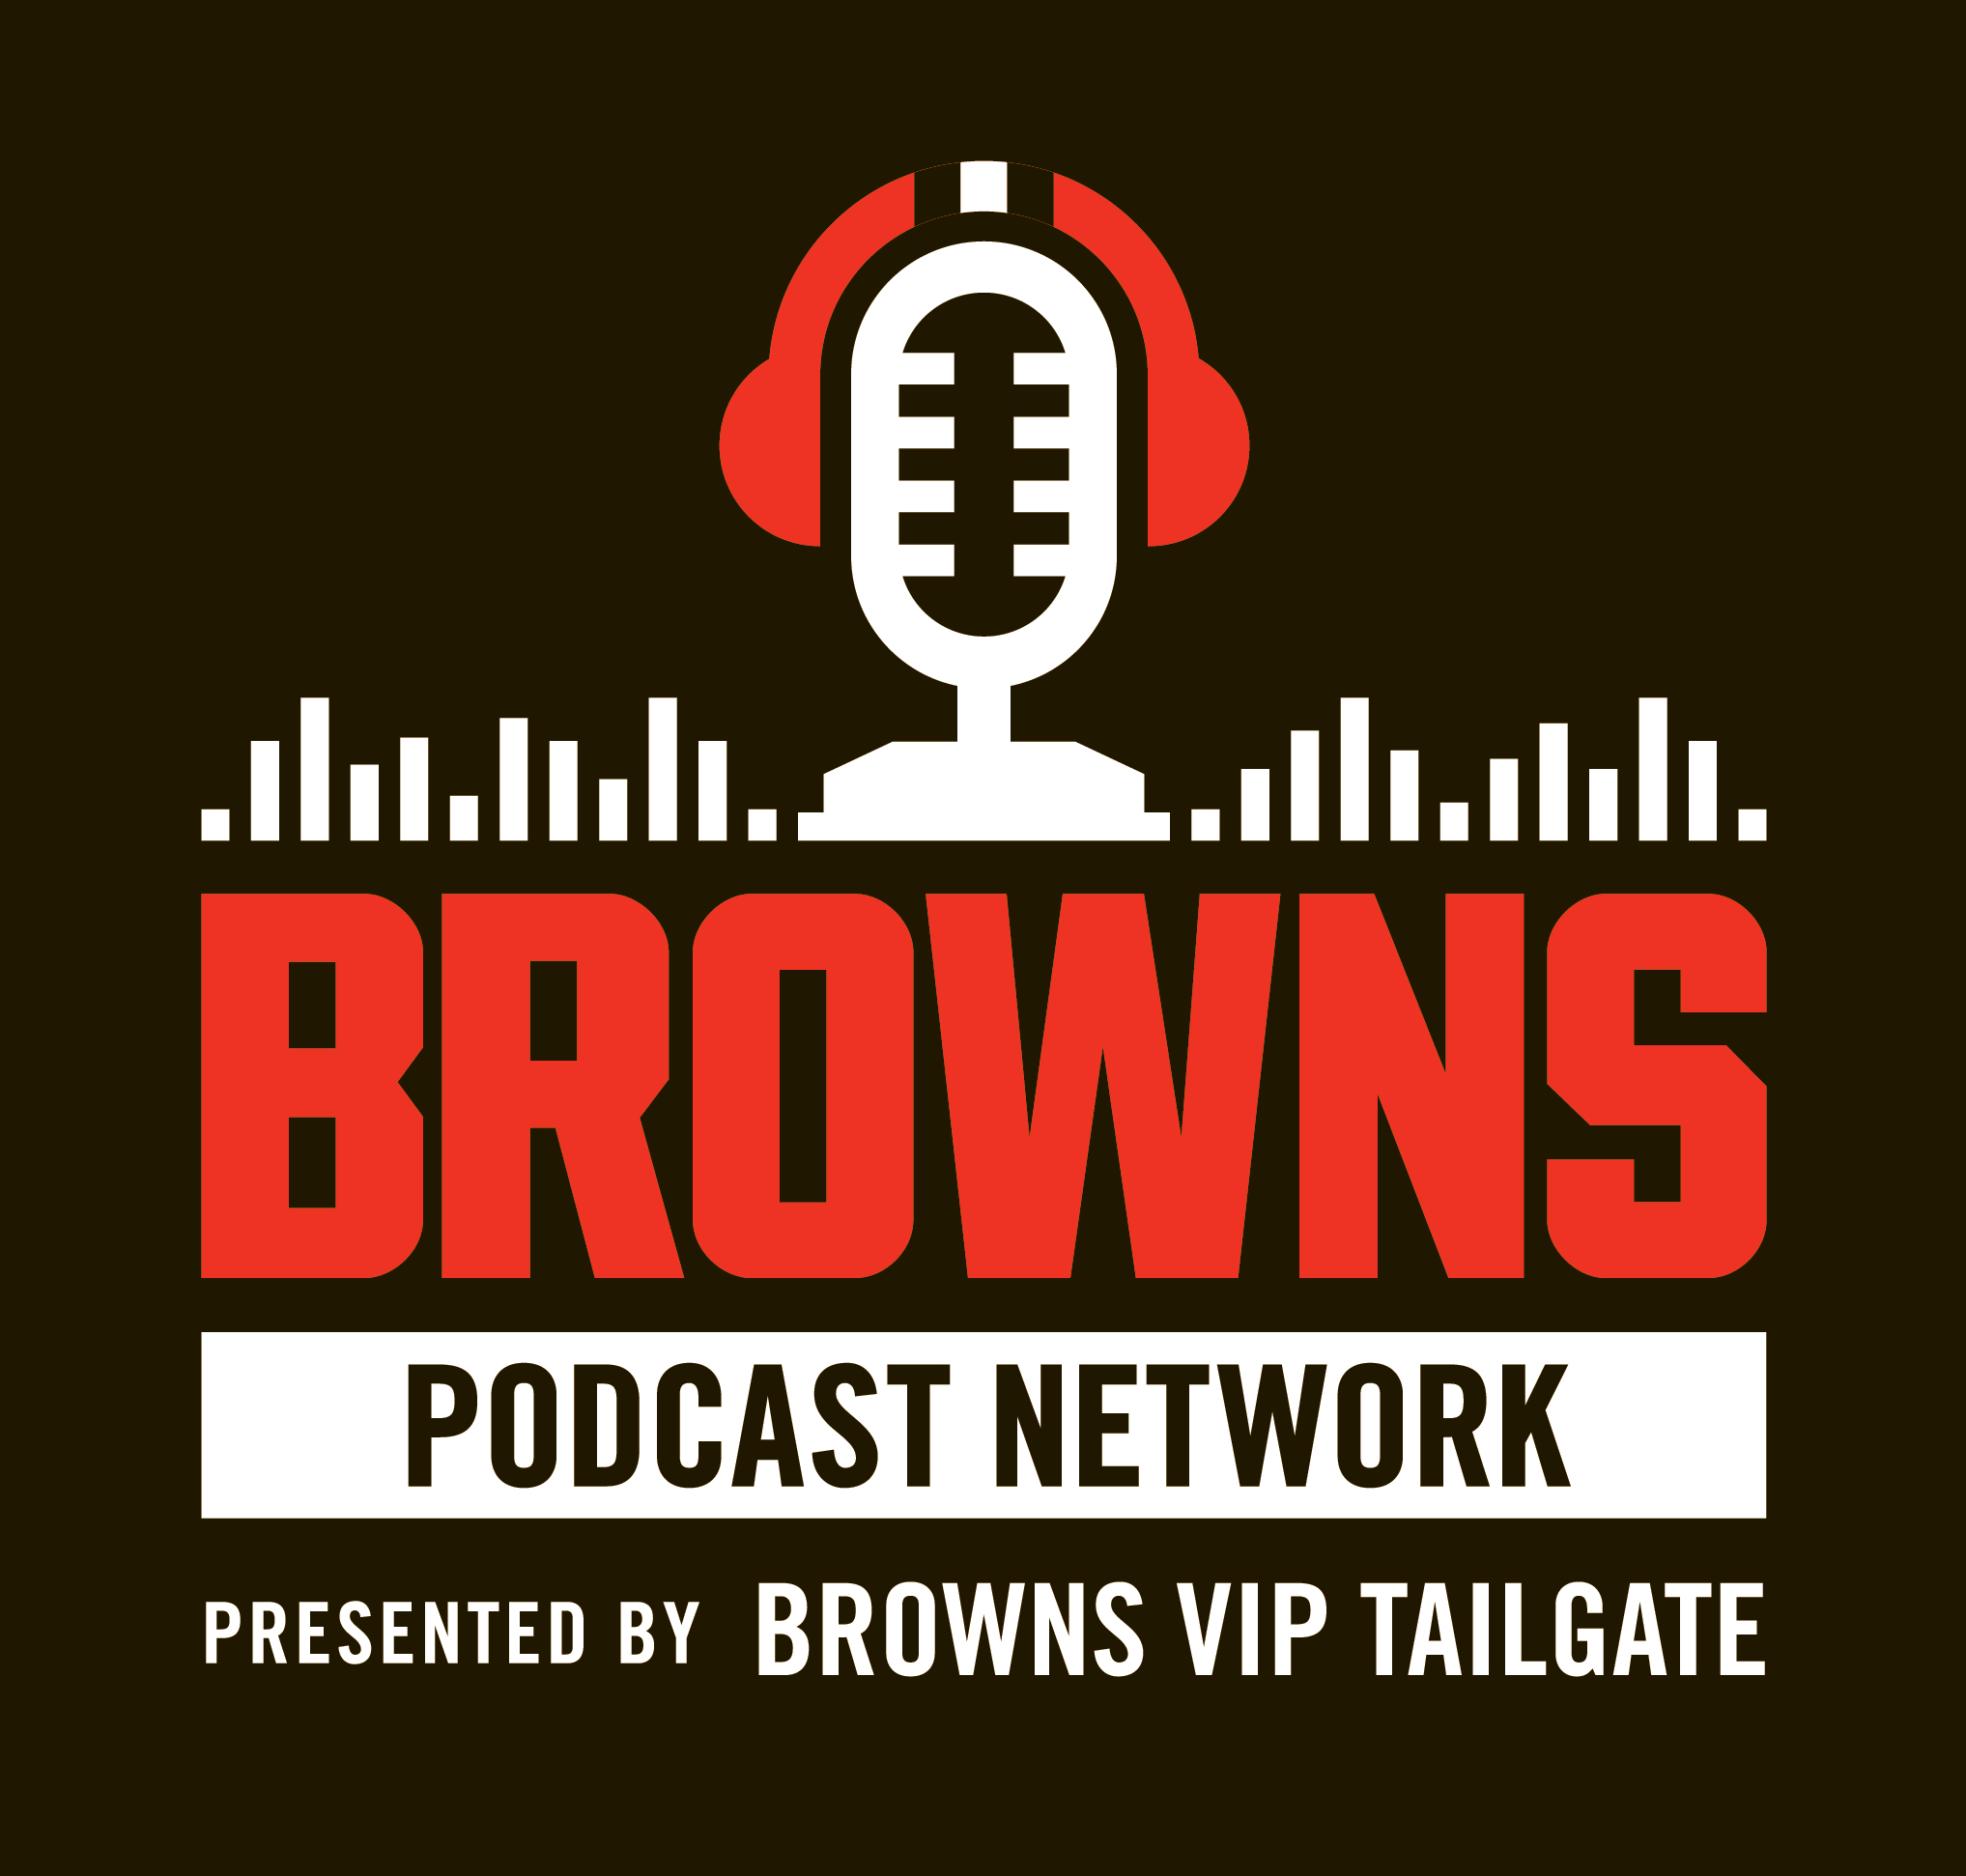 Cleveland Browns Daily - A Post Thanksgiving Football Feast